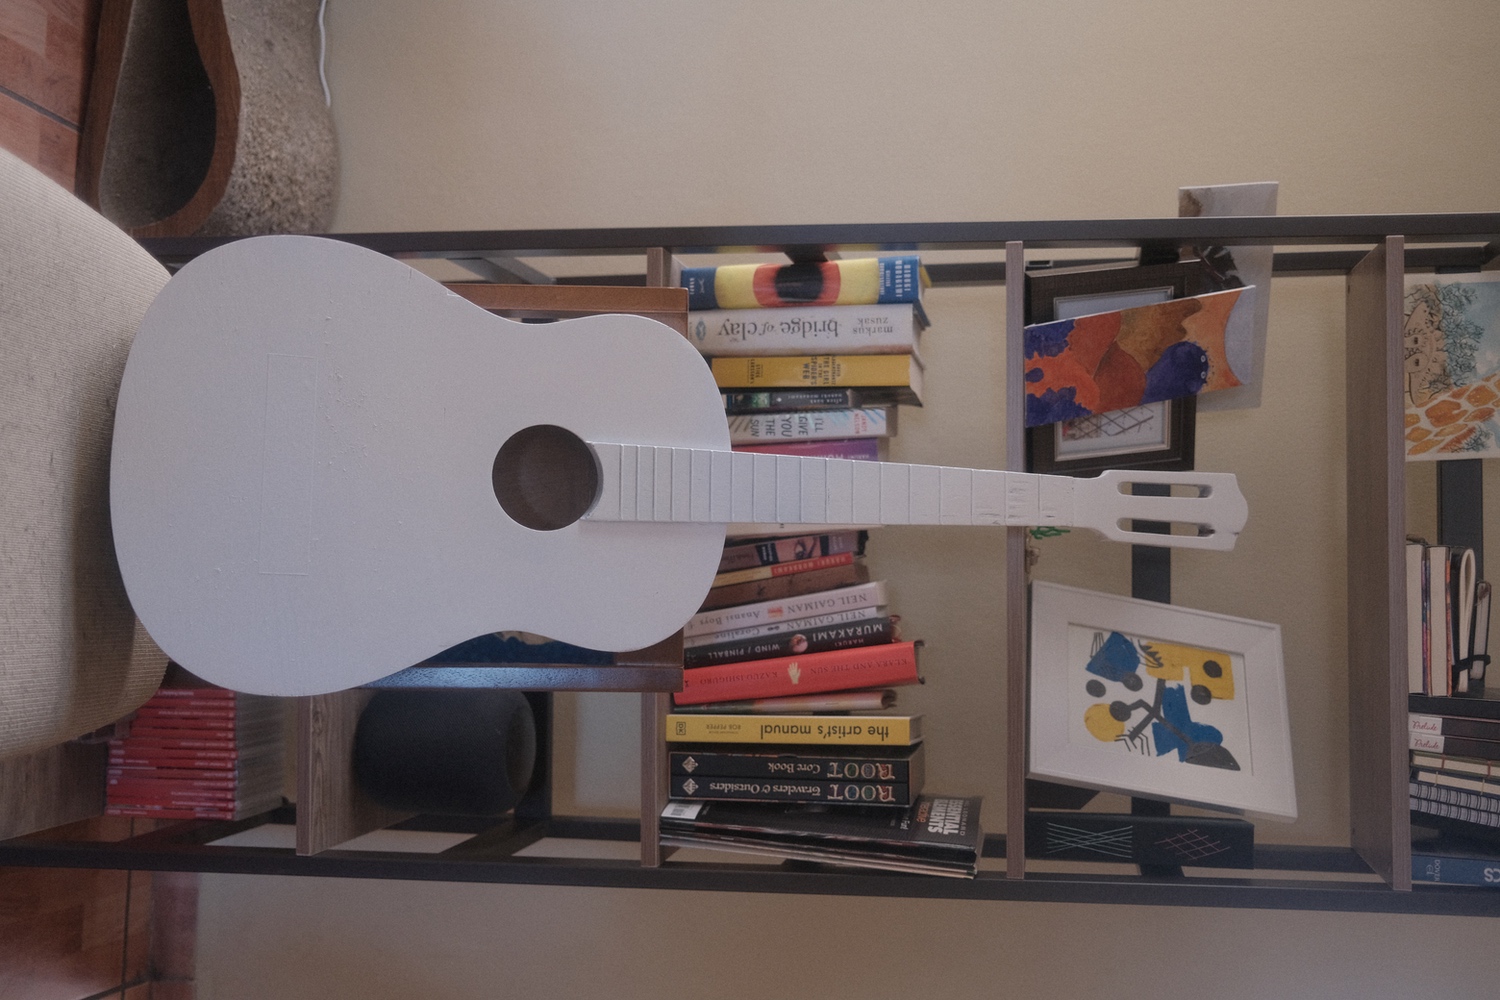 The guitar with it's white primer